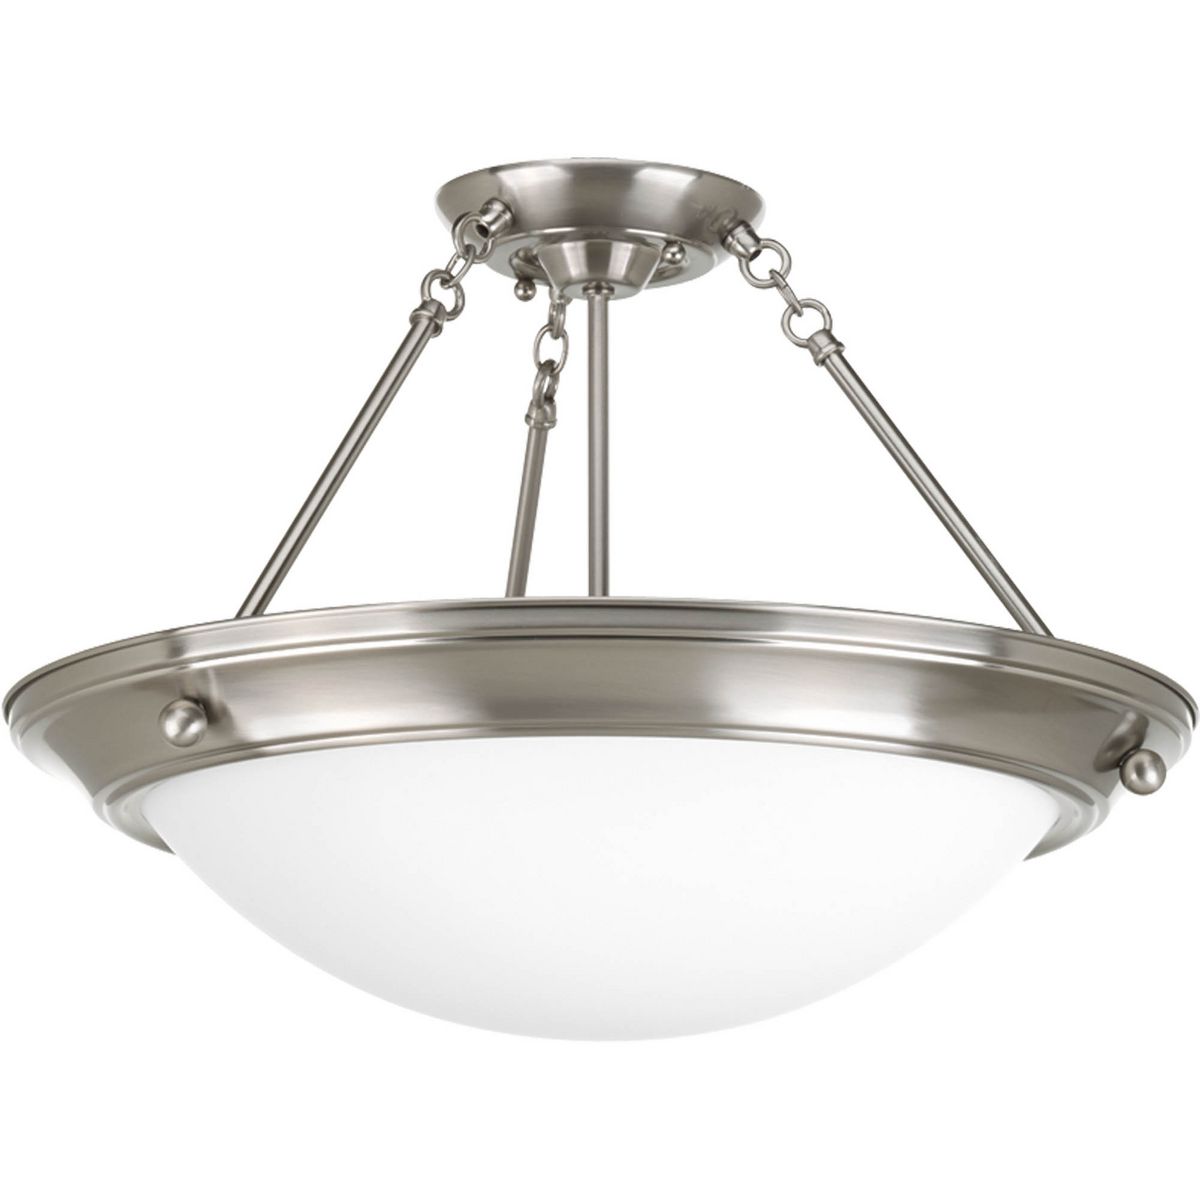 PROGRESS LIGHTING P3569-09 Brushed Nickel Eclipse Collection Three-Light 19-3/8" Close-to-Ceiling